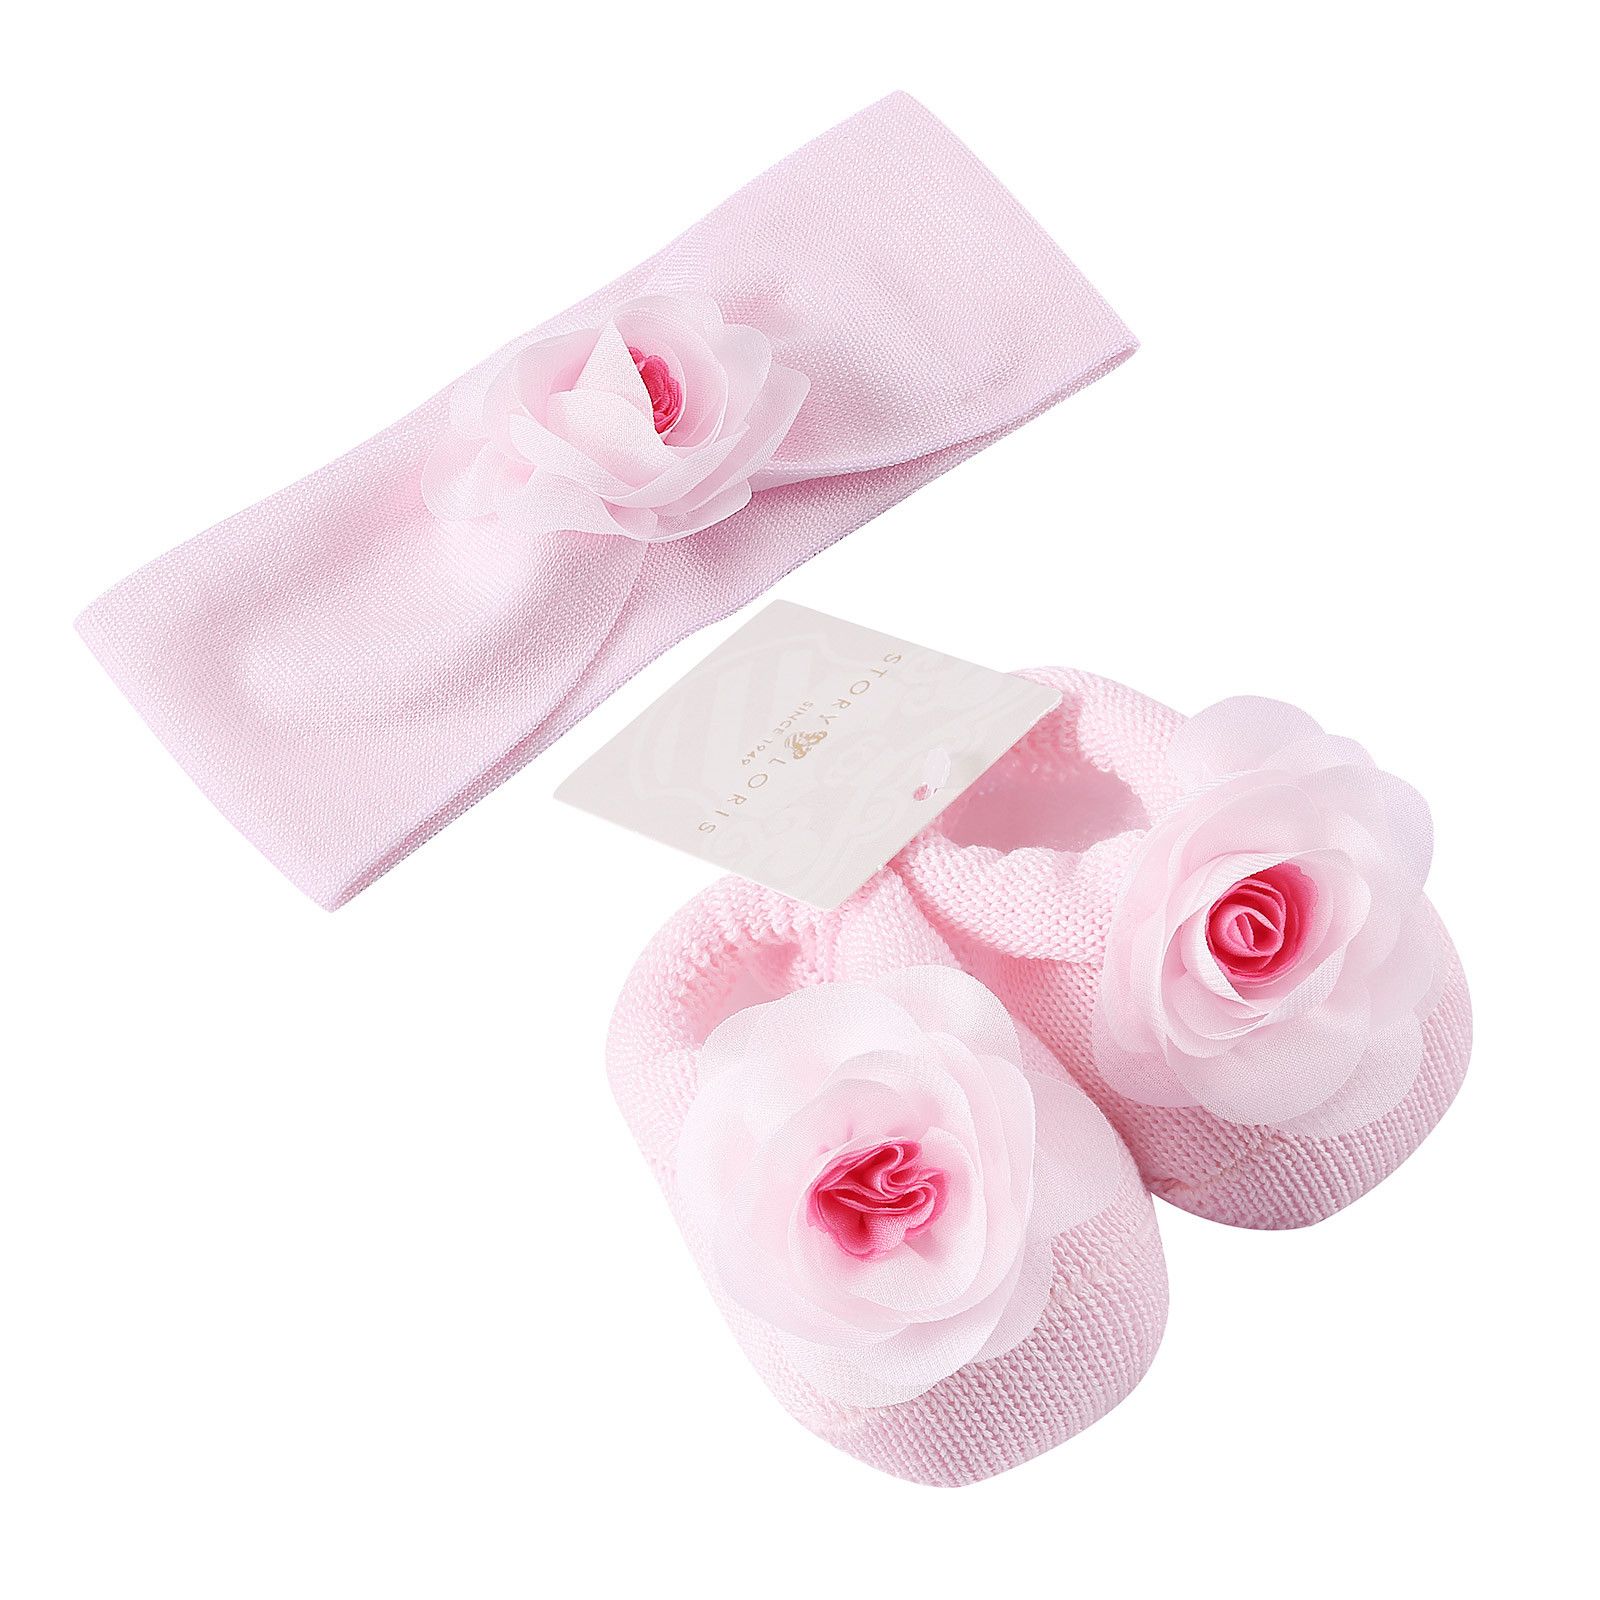 Baby Pink Knitted Cotton Rose Shoes&Hair Band Gift Set - CÉMAROSE | Children's Fashion Store - 1